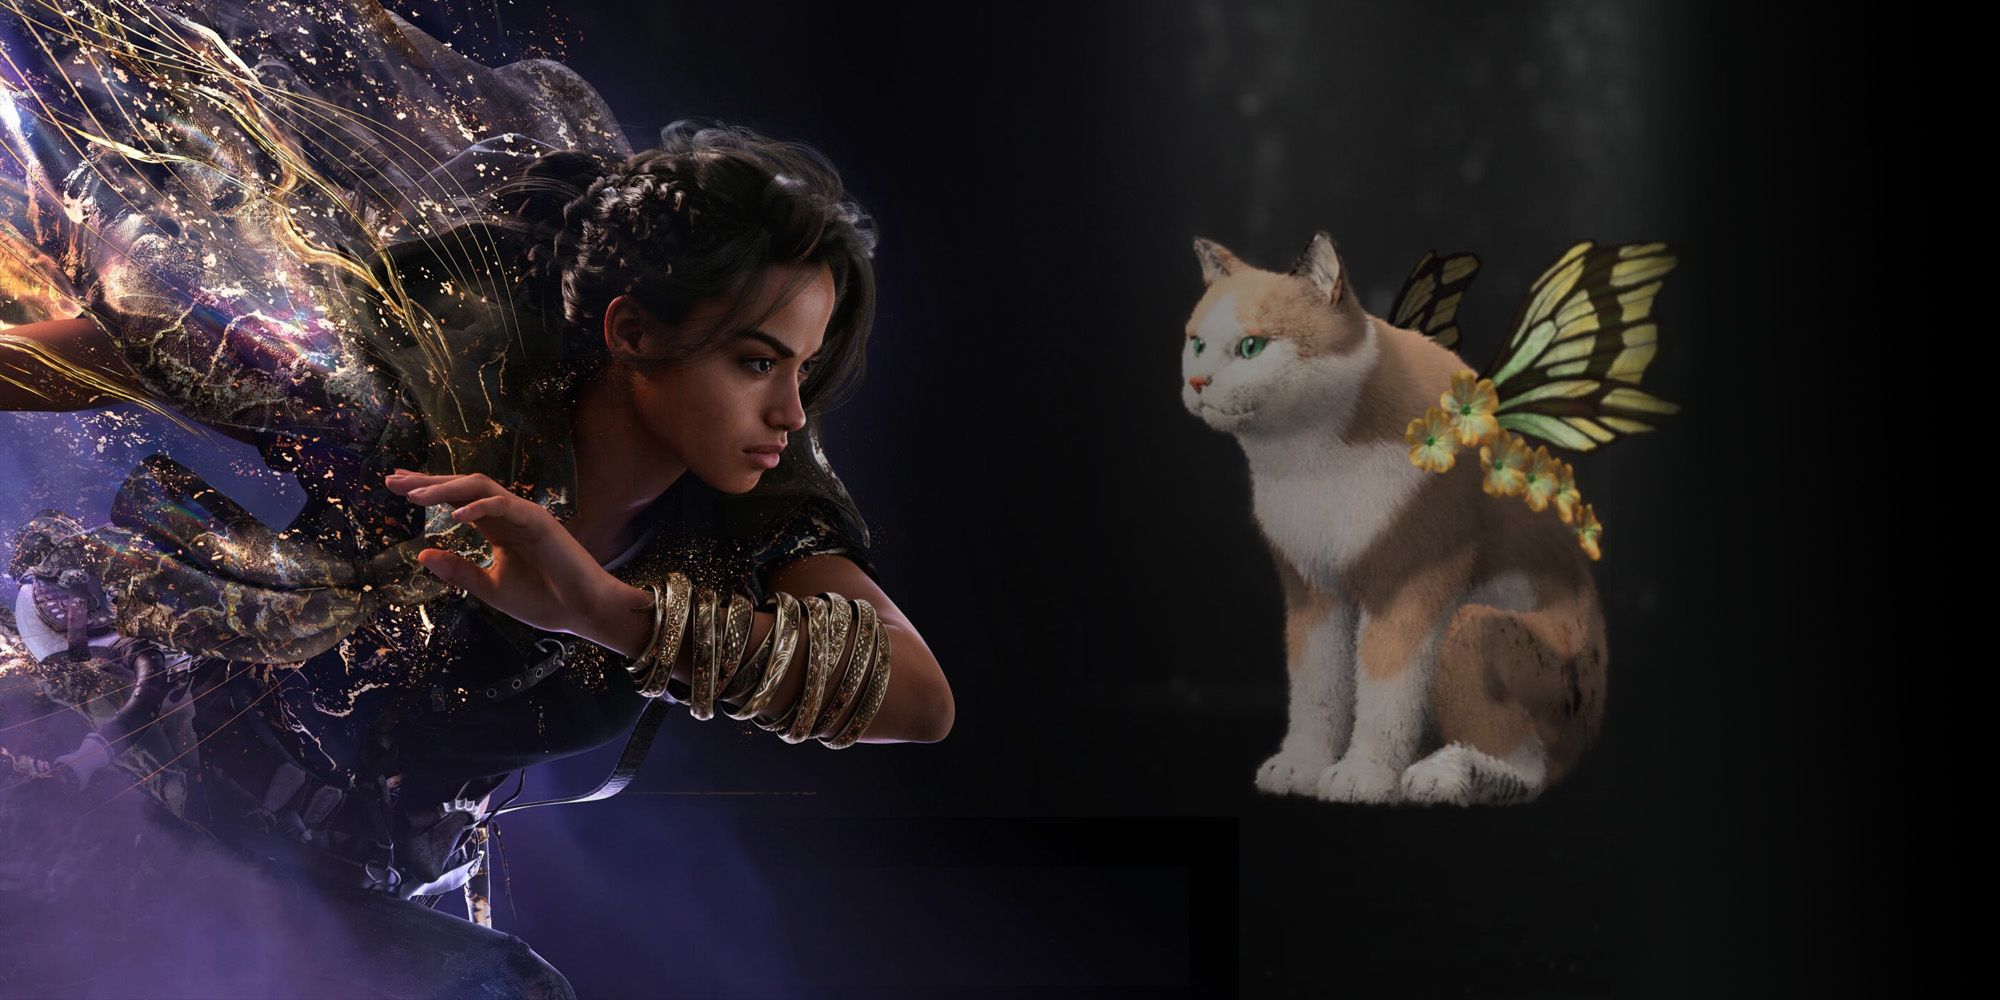 Frey from Forspoken on the left, Tanta's Familiar cat with butterfly wings on the right against a black background.